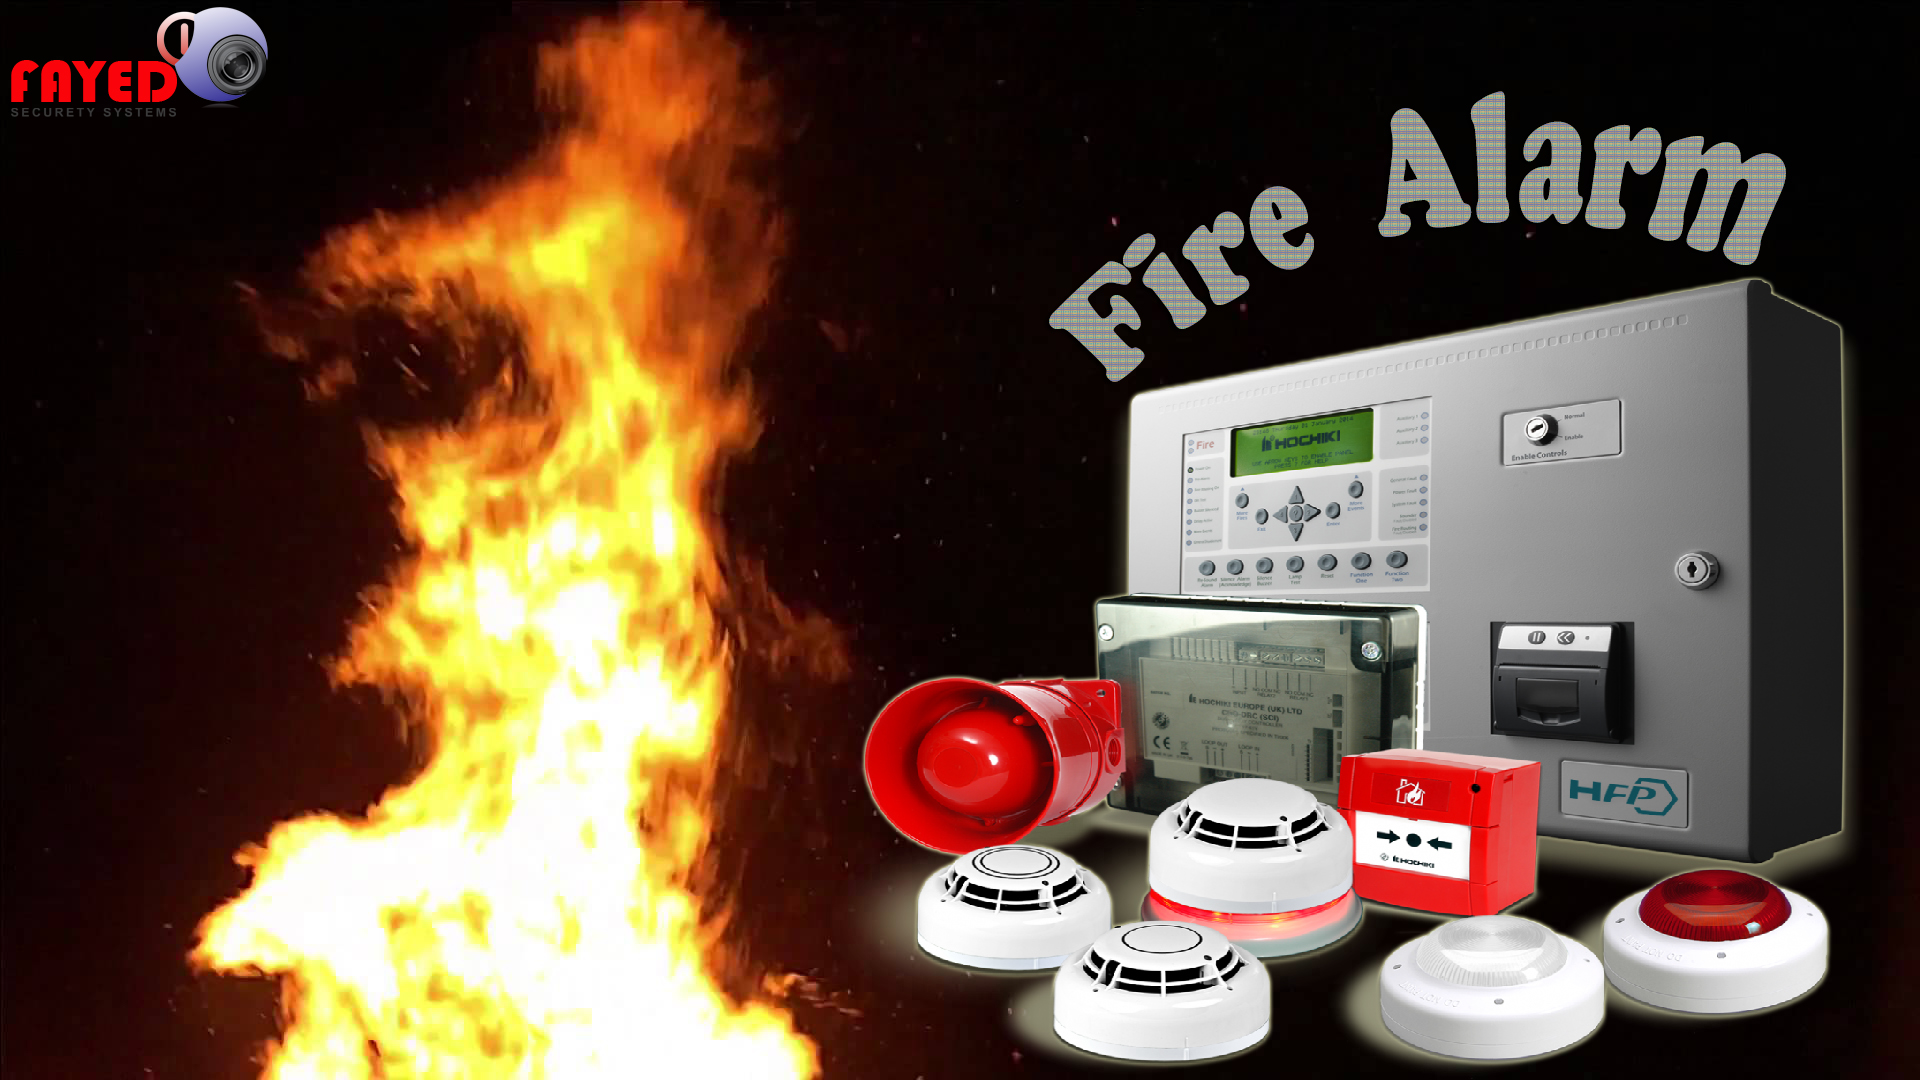 samplex fire alarm fayed security systems